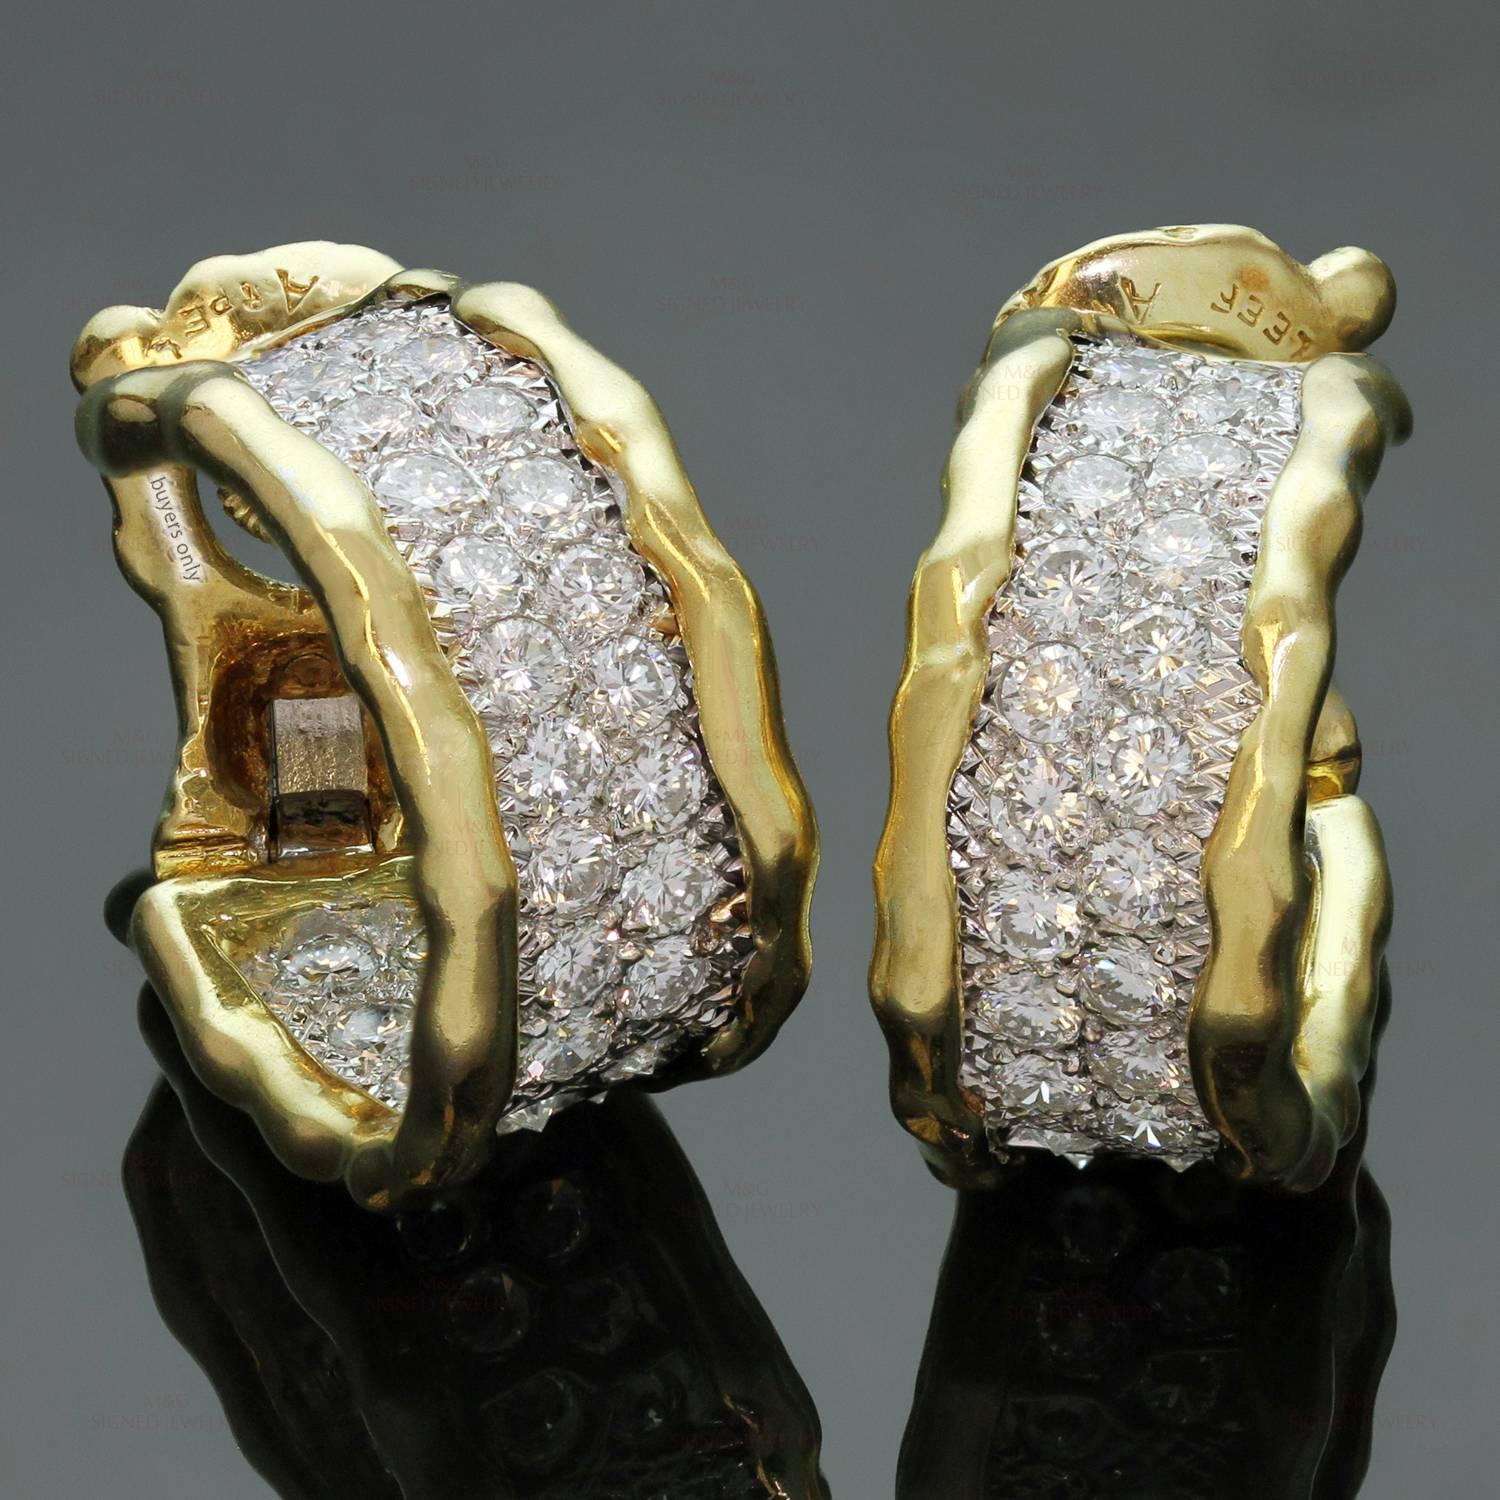 These magnificent Van Cleef & Arpels earrings feature a classic wrap design crafted in 18k yellow gold and set with brilliant-cut round diamonds of an estimated 4.50 carats. Made in France circa 1990s. Measurements: 0.43" (11mm) width,